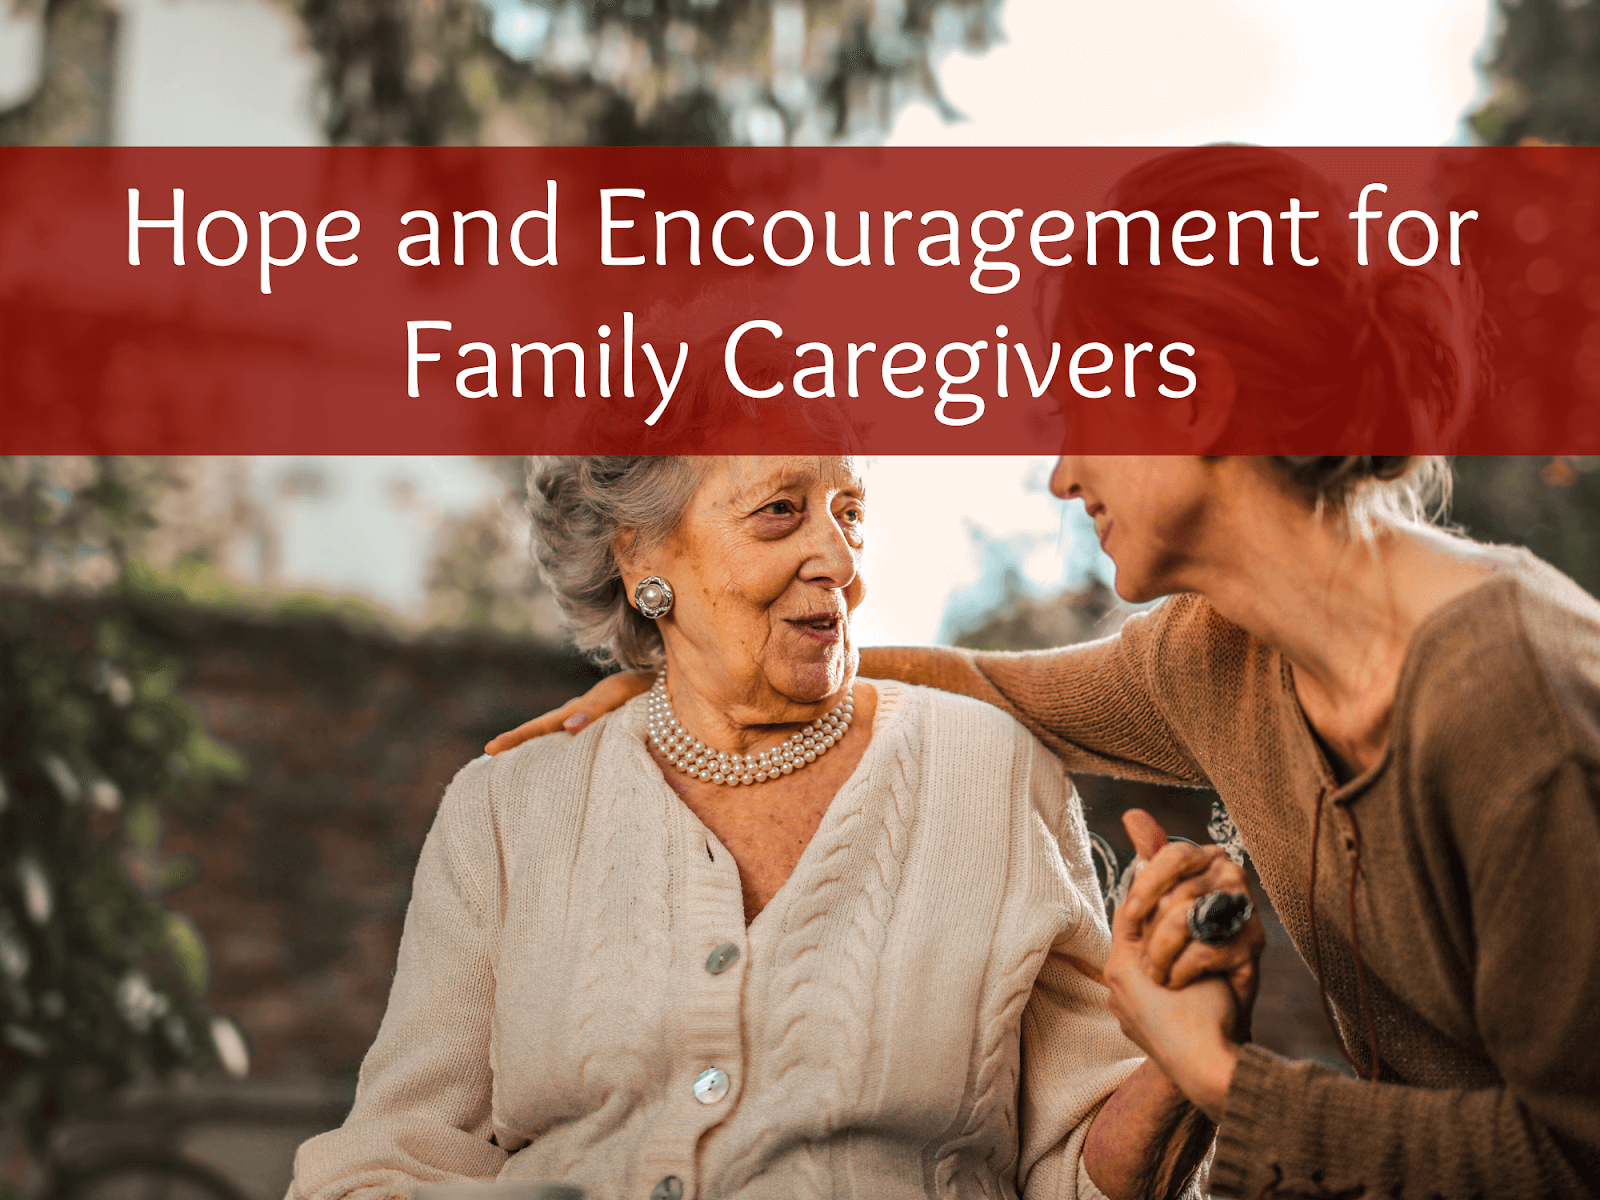 Hope and Encouragement for Family Caregivers